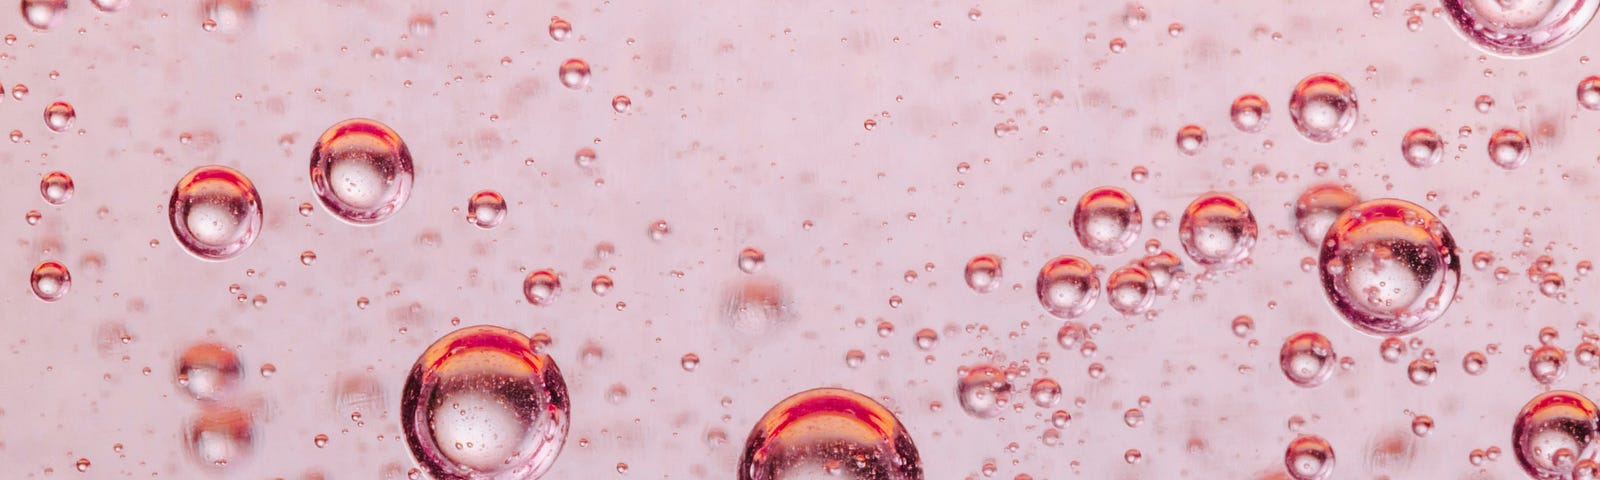 red bubbles